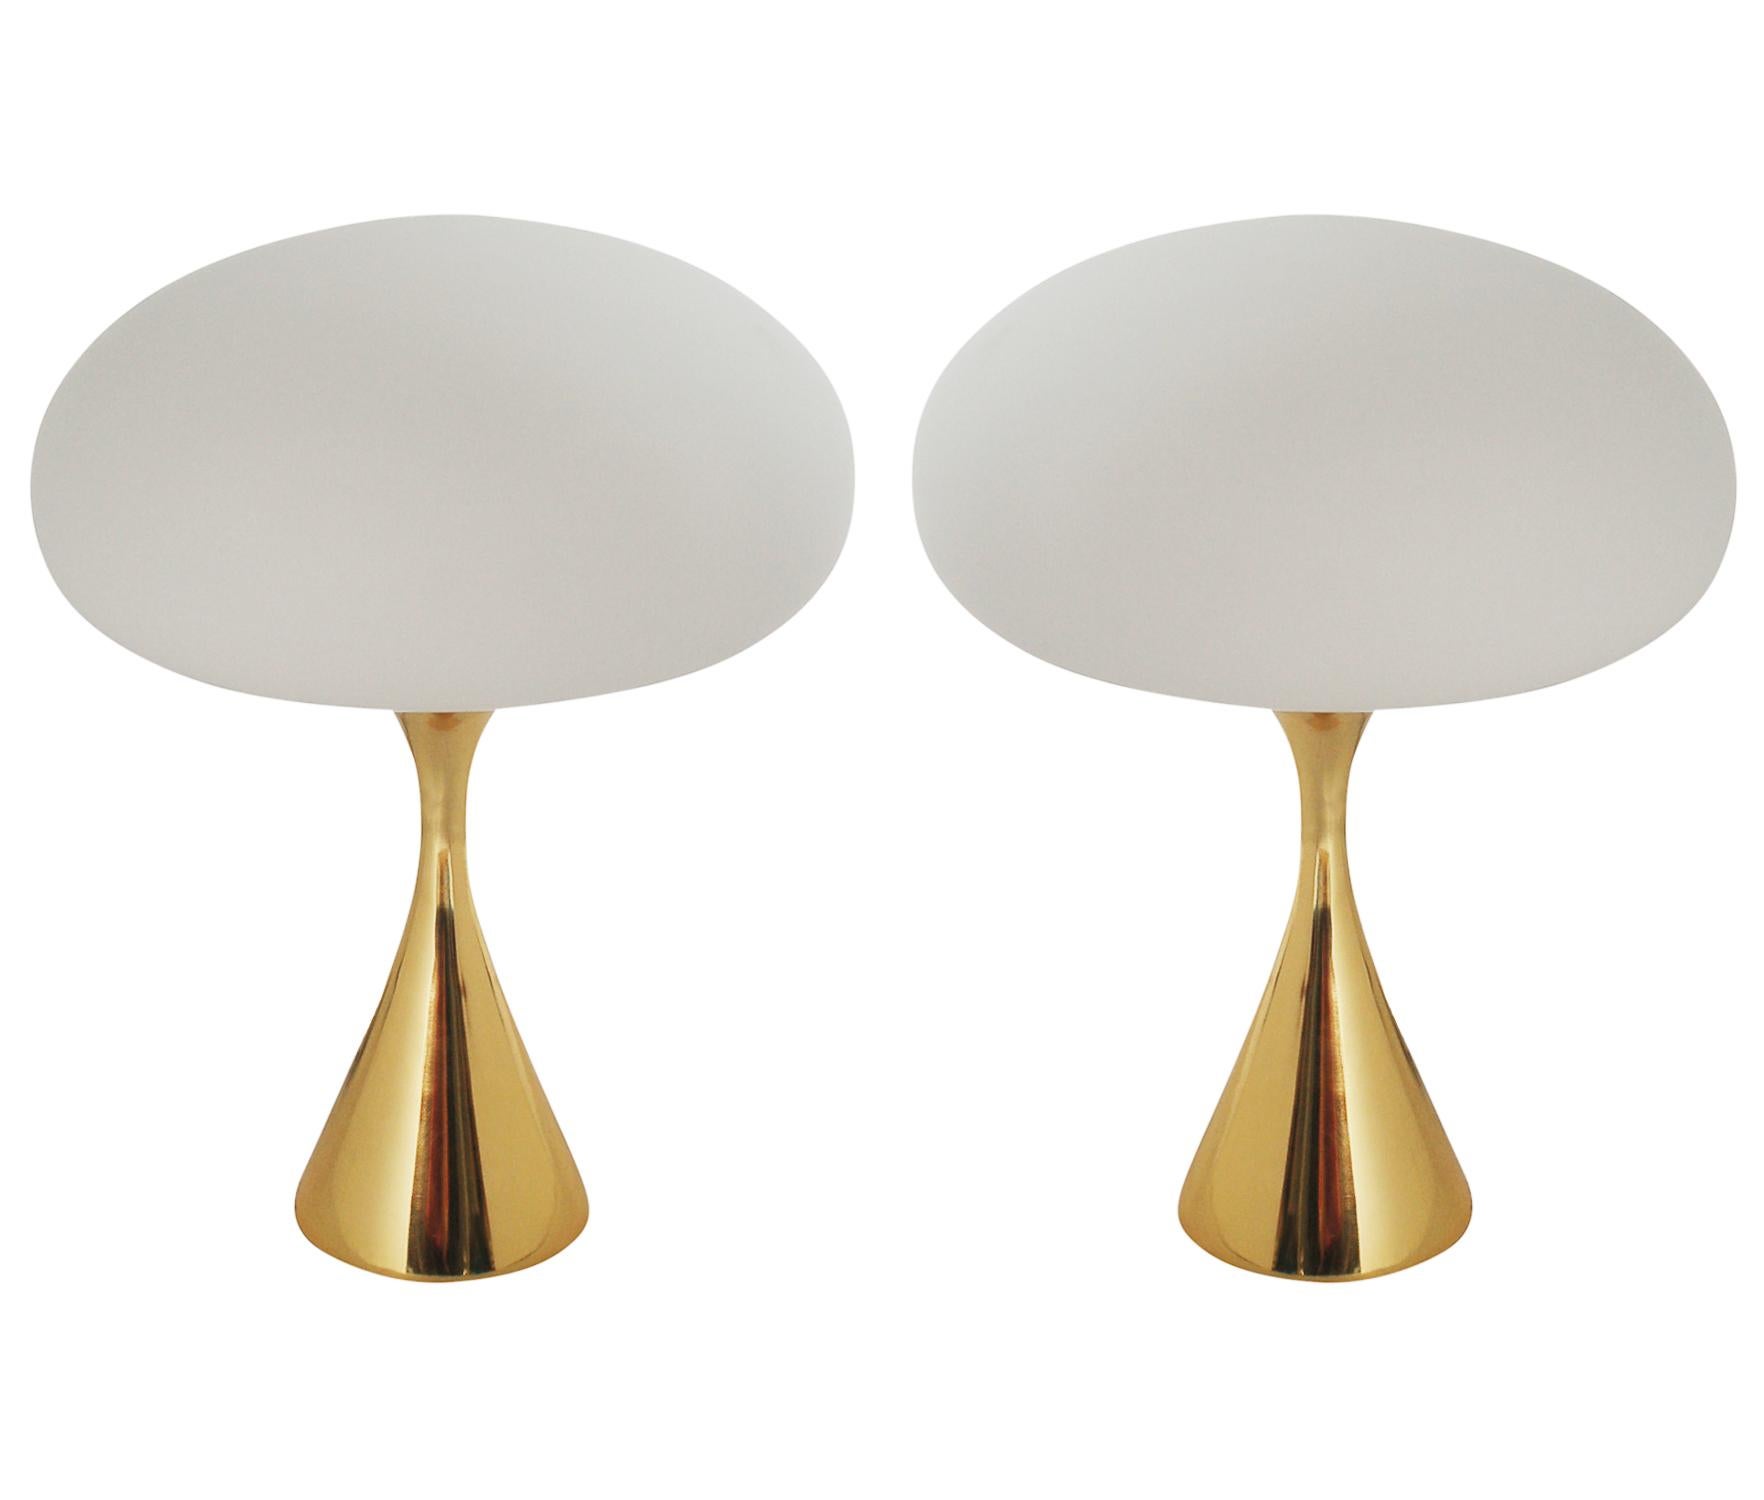 American Pair of Mid-Century Modern Laurel Mushroom Table Lamps in Brass by Bill Curry